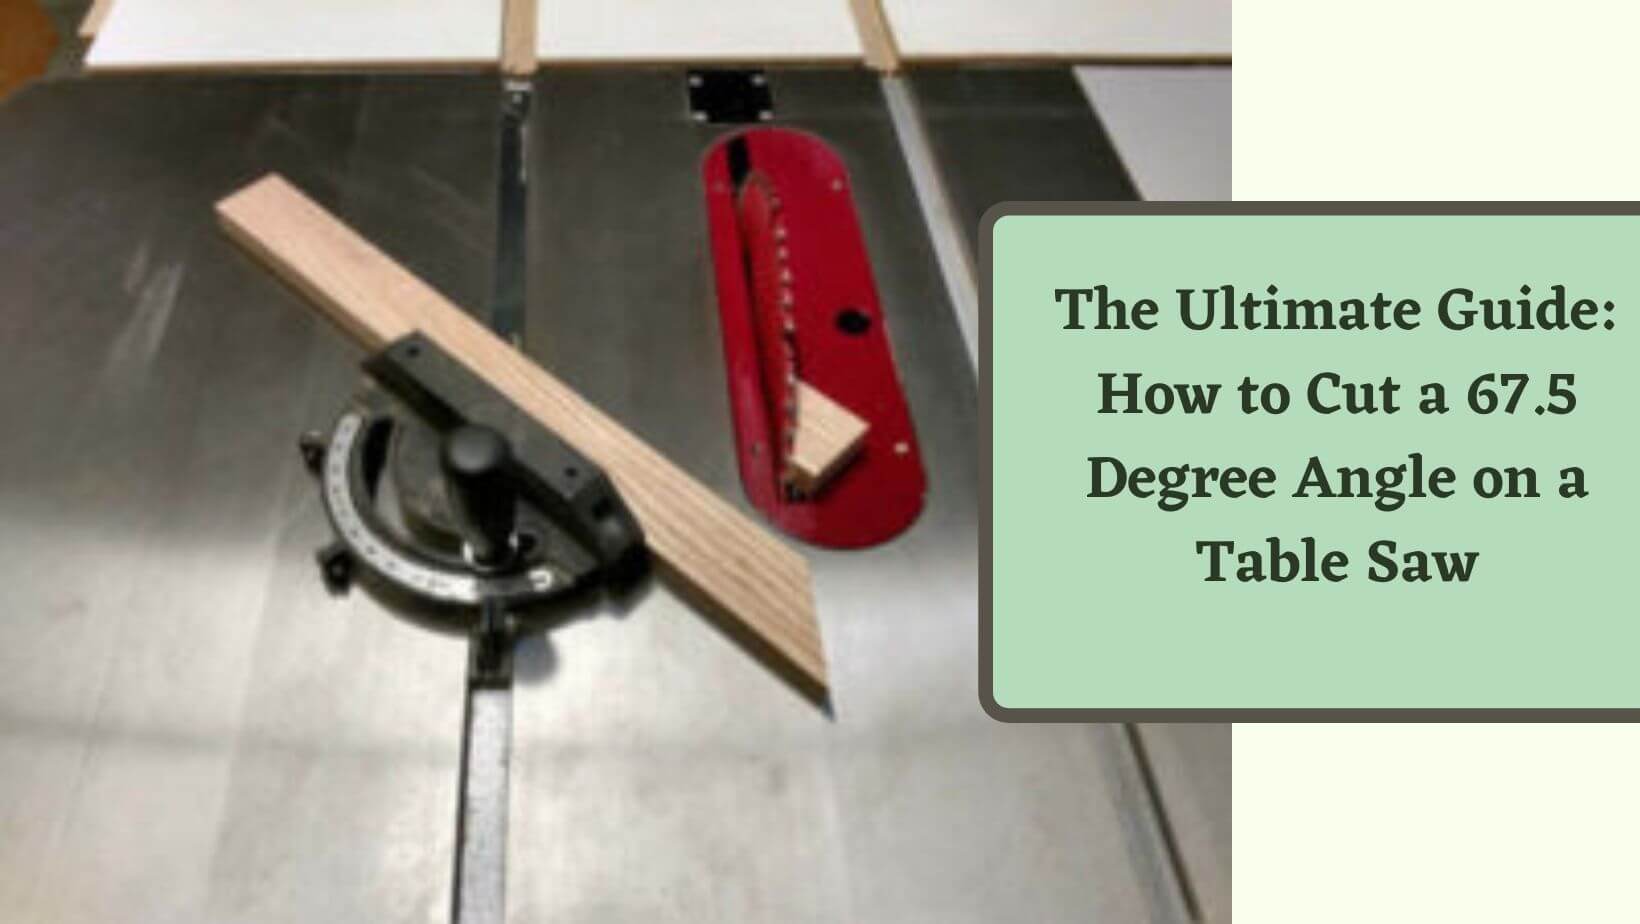 How to cut a 67.5 degree angle on a table saw